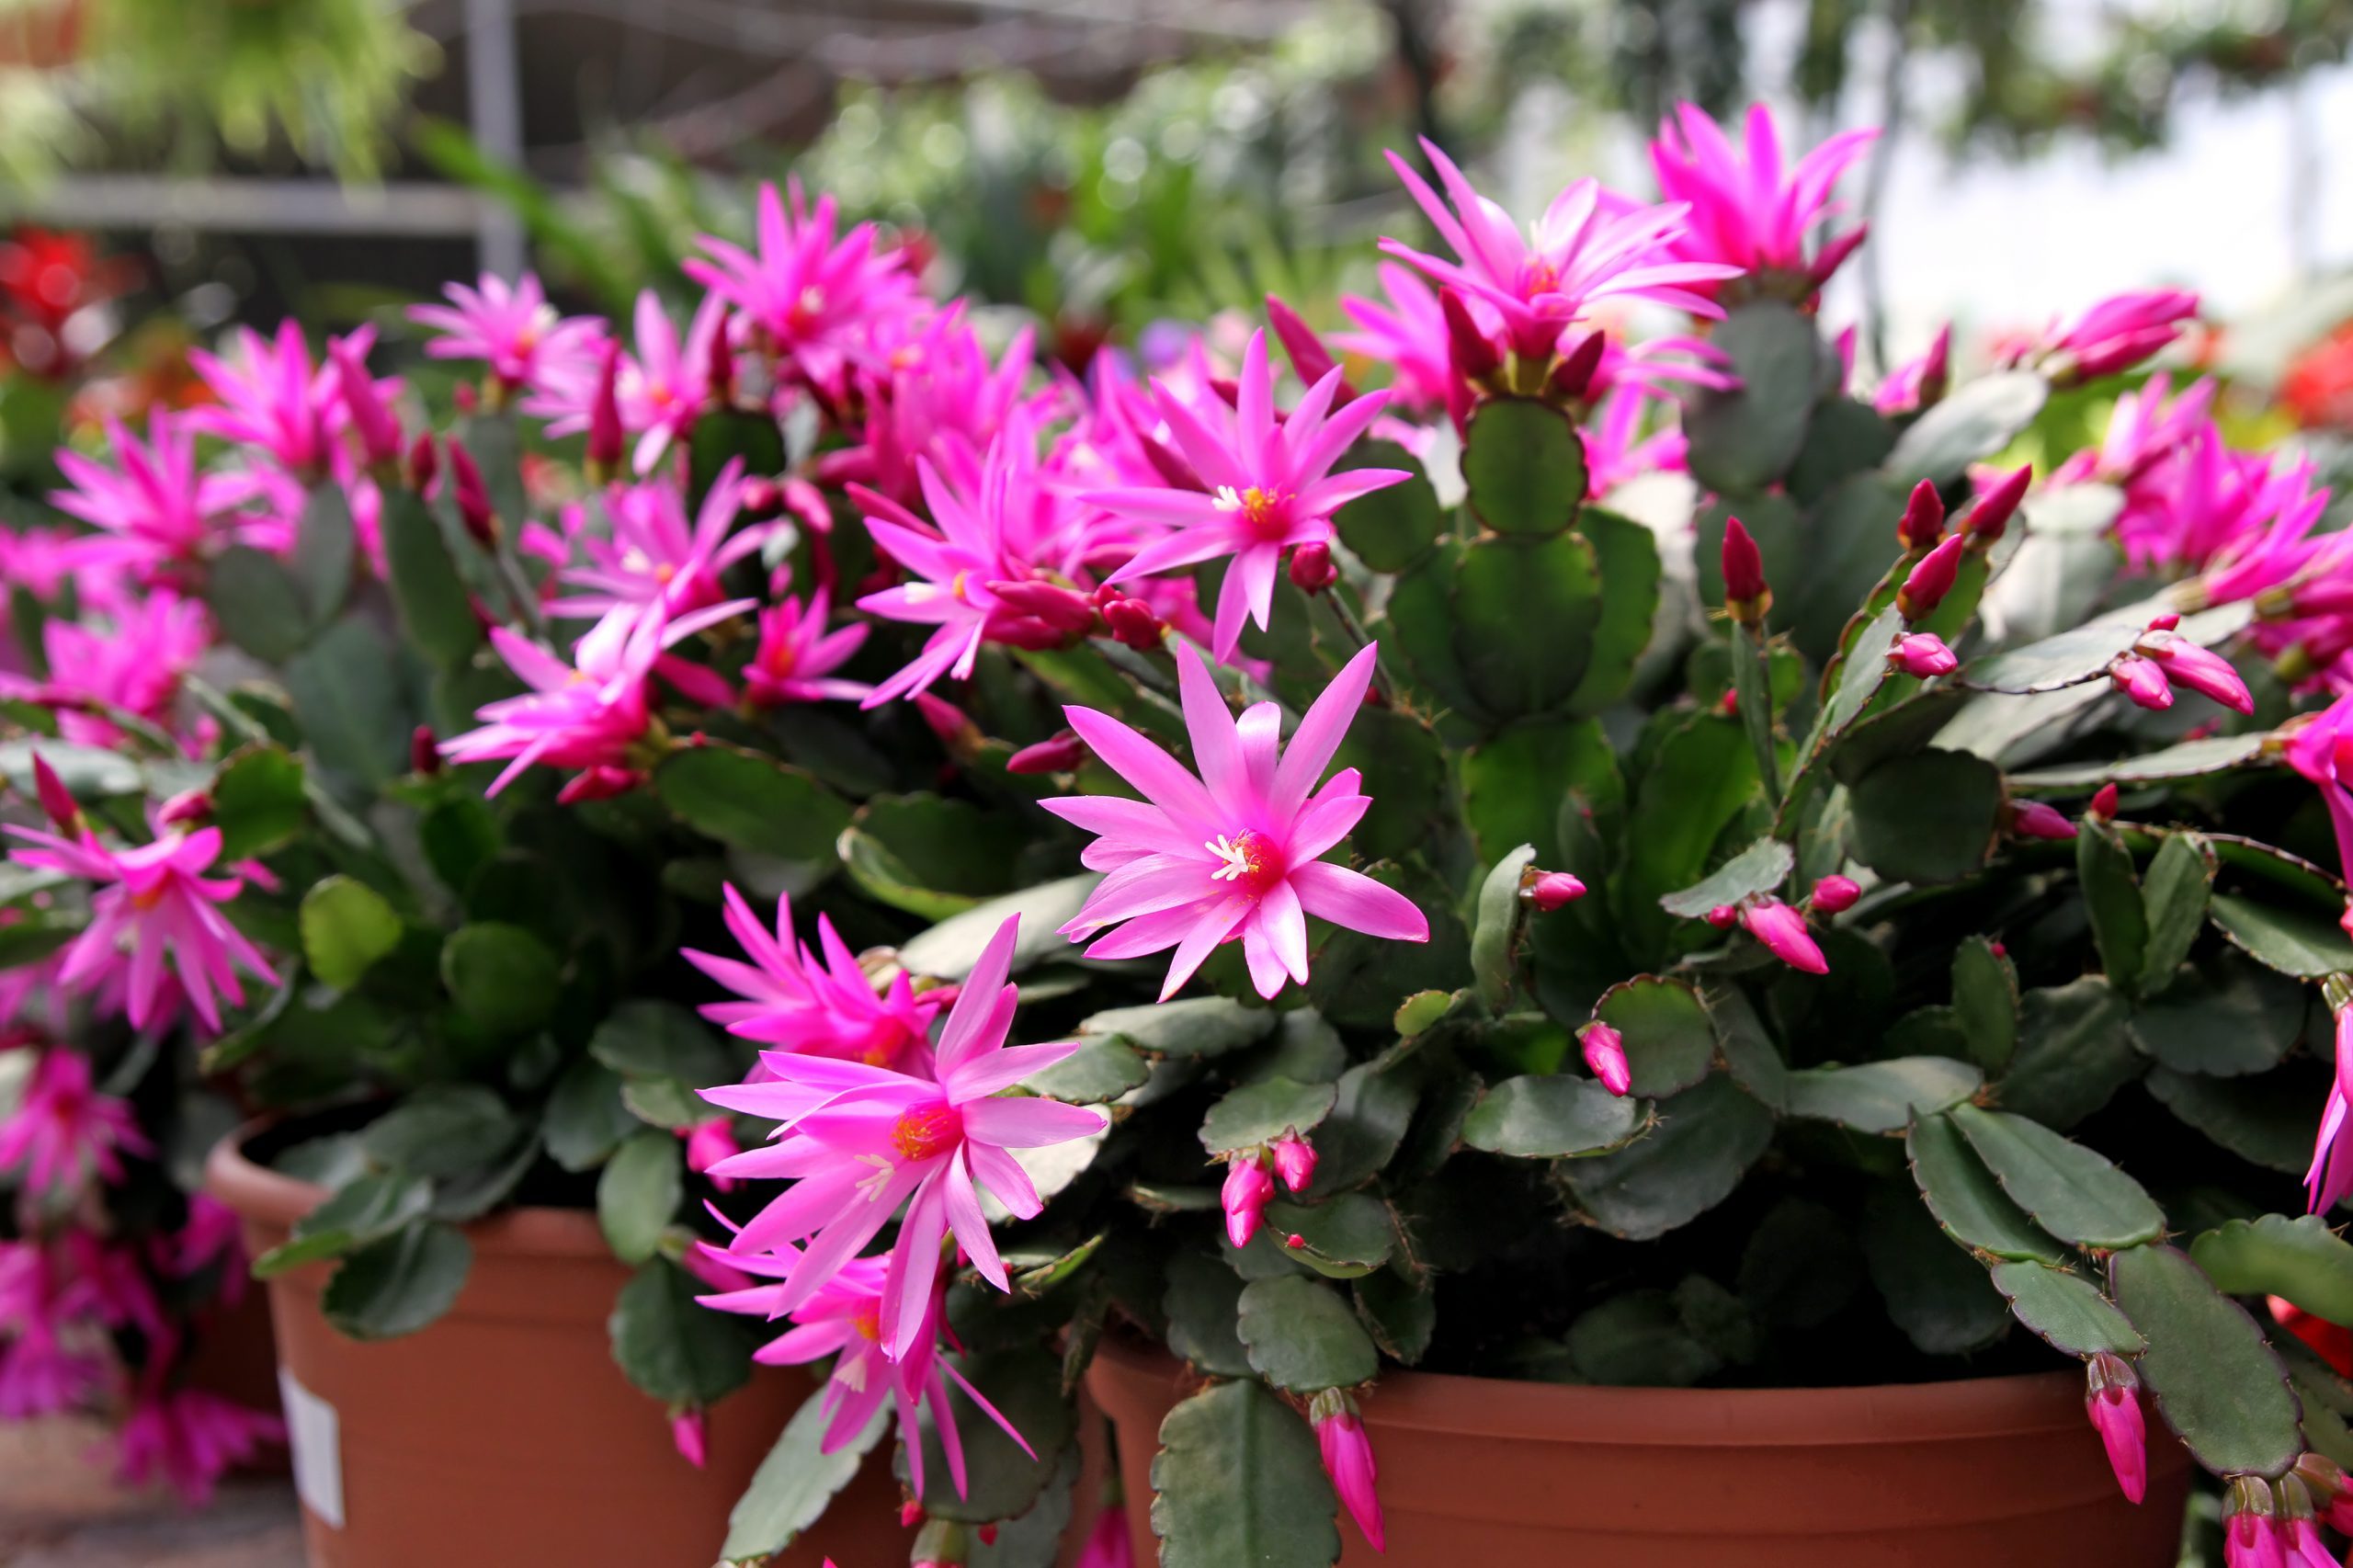 How To Grow and Care for an Easter Cactus